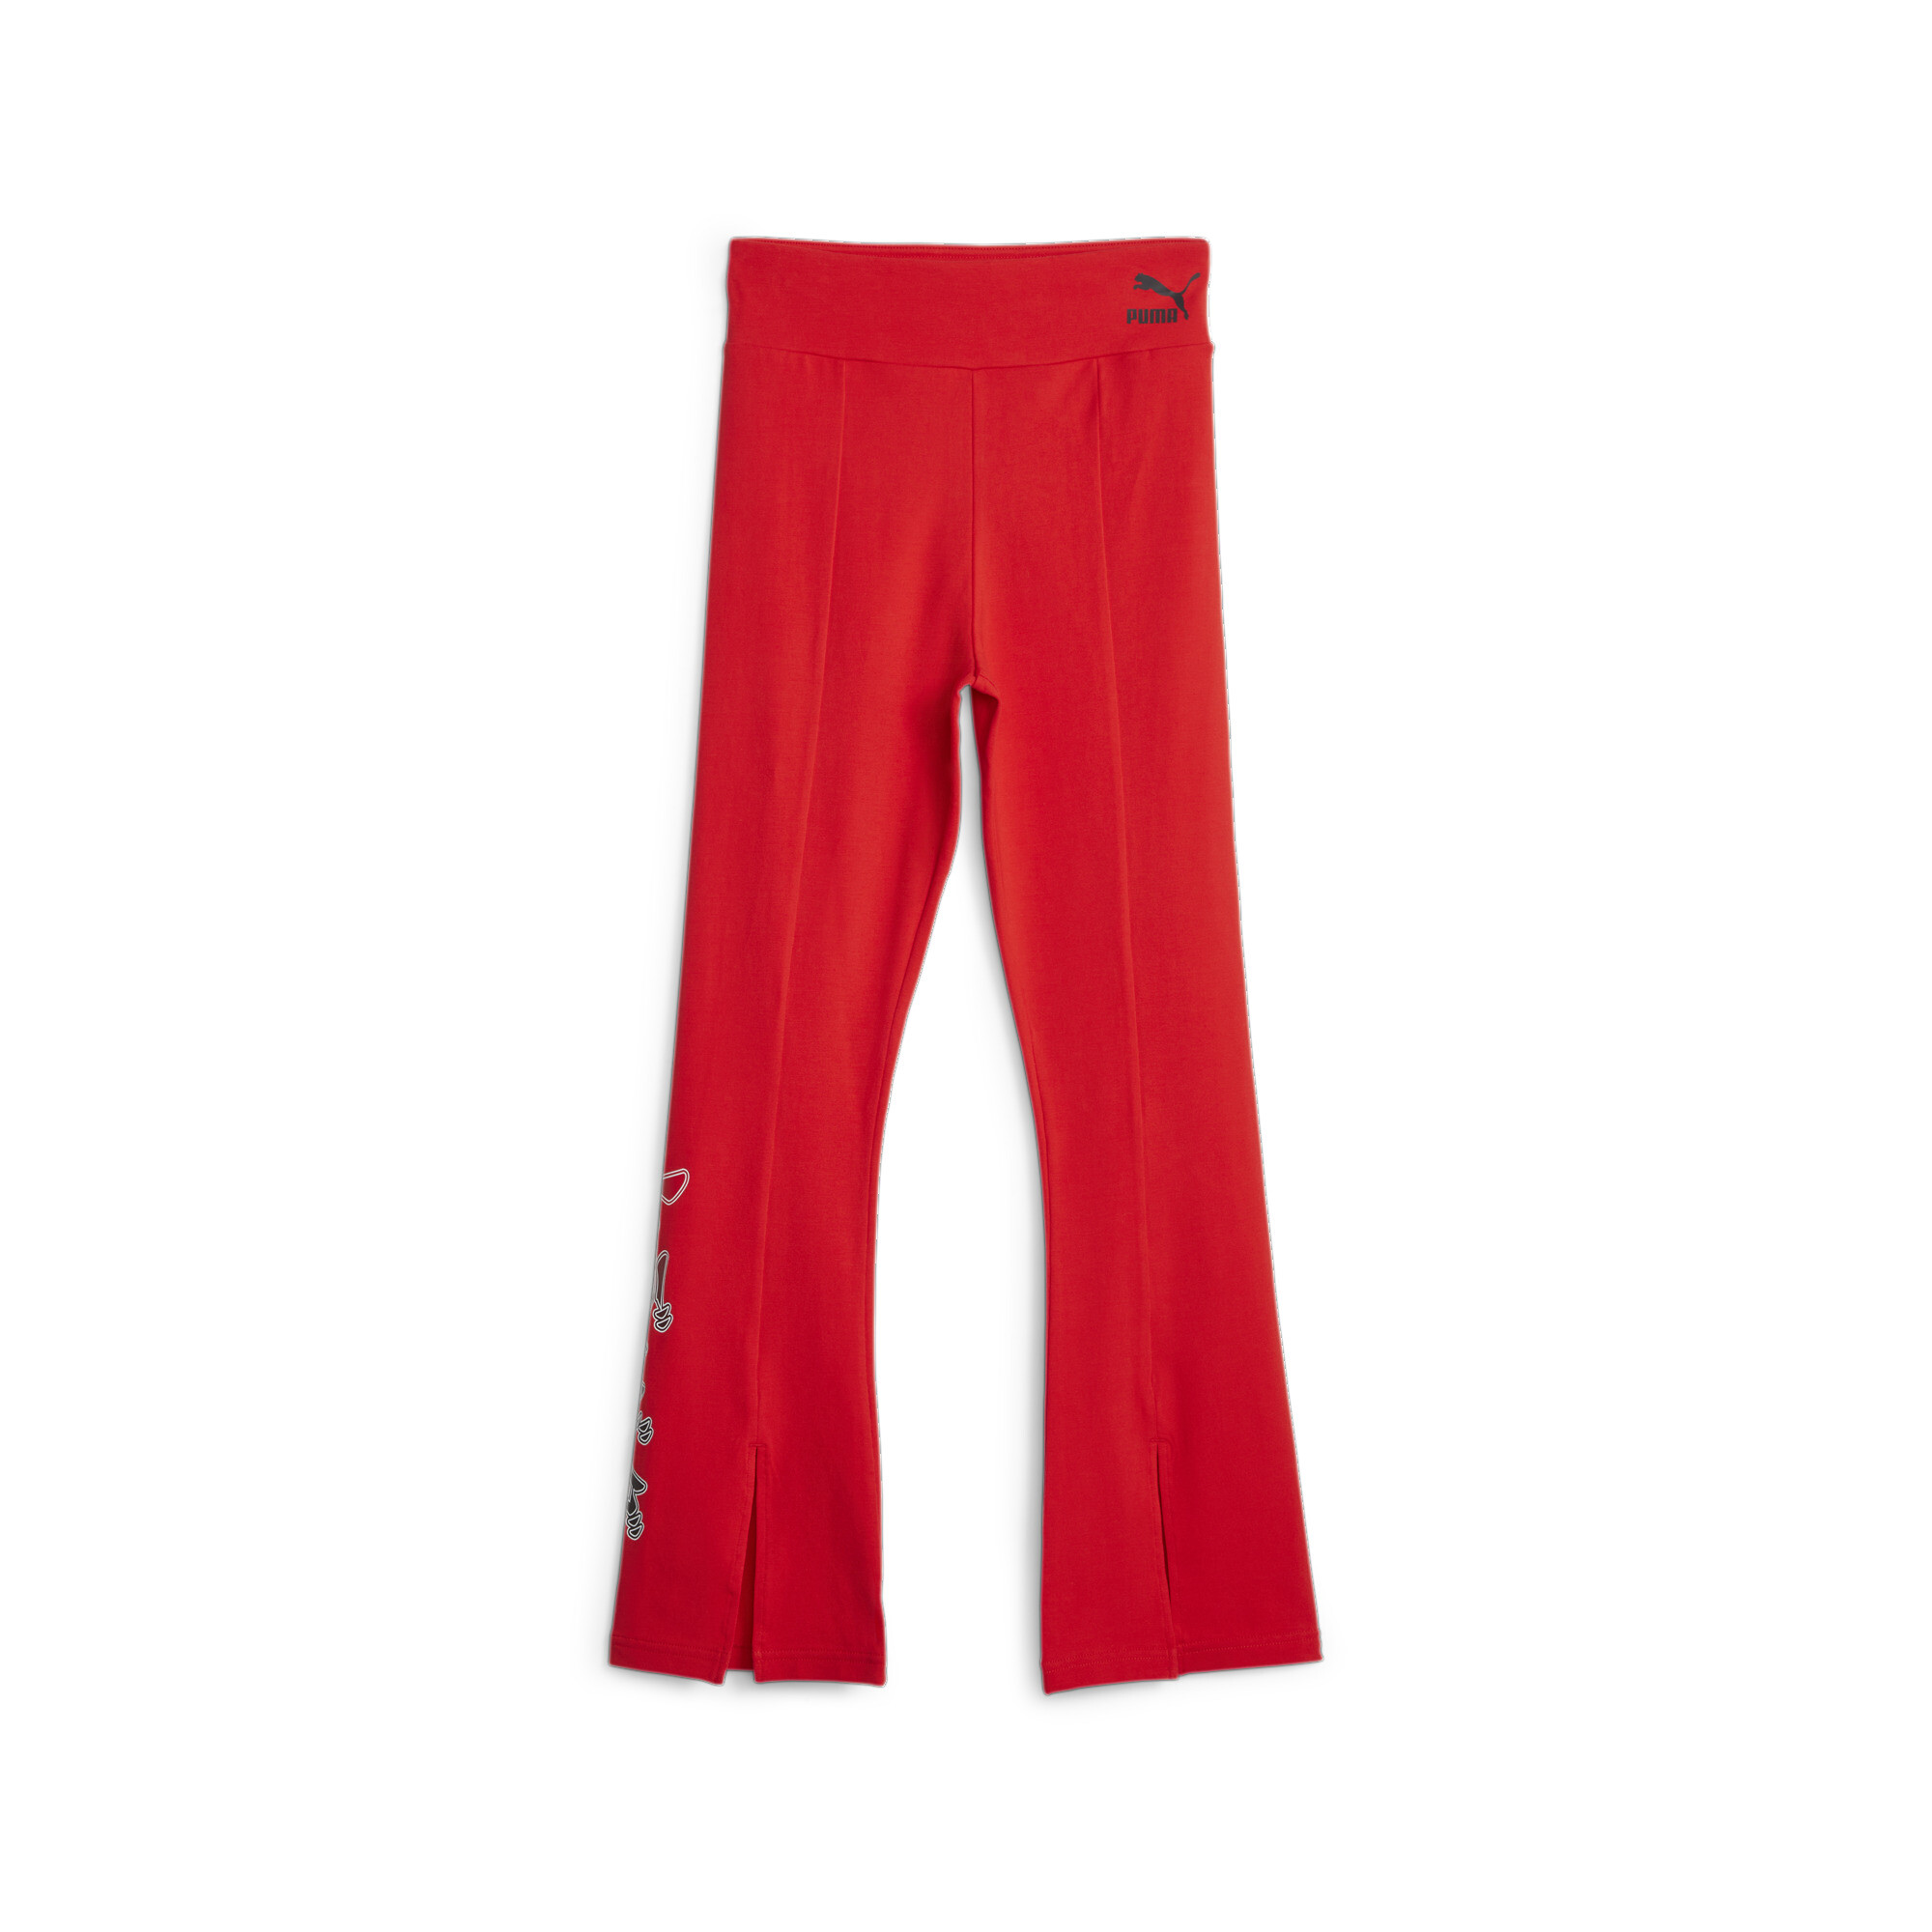 PUMA X MIRACULOUS Leggings In Red, Size 7-8 Youth